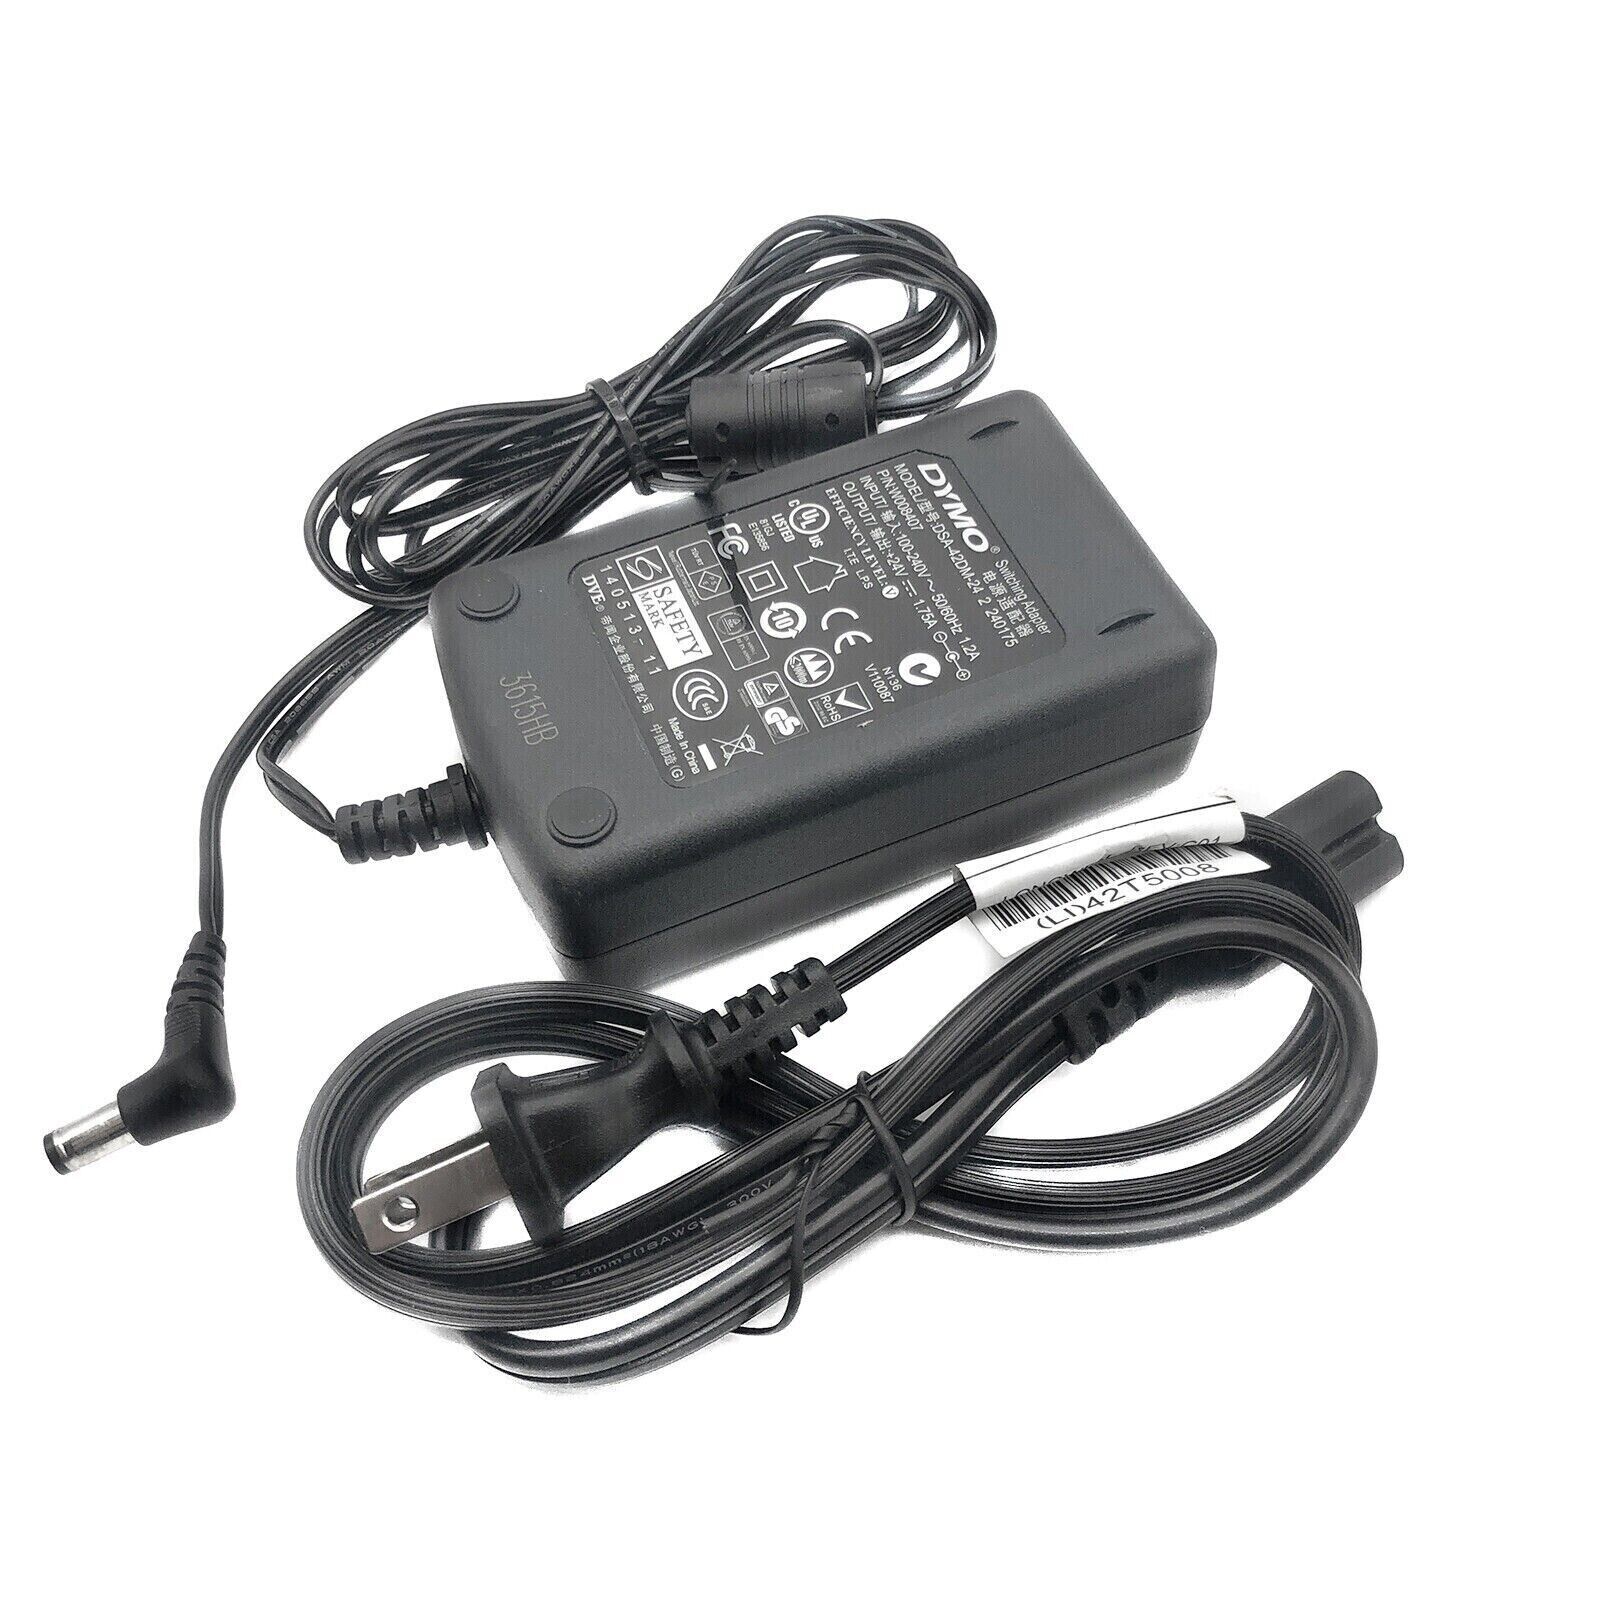 Genuine OEM Dymo LabelWriter 400 Power Supply Switching Adapter 1733232 24V Compatible Brand For Dymo Brand Dymo Type P